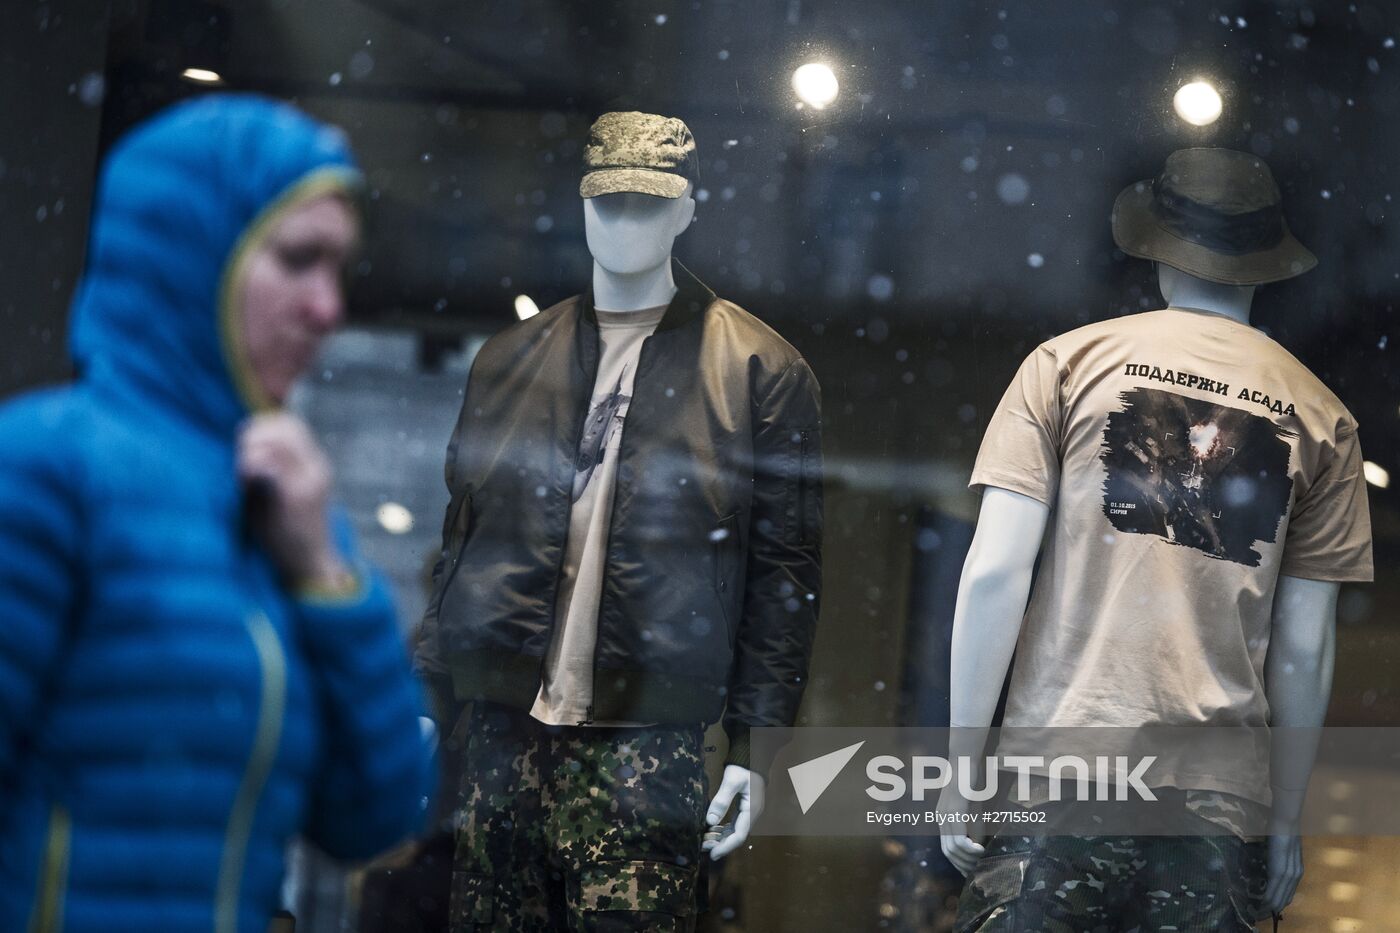 Army of Russia store in Moscow